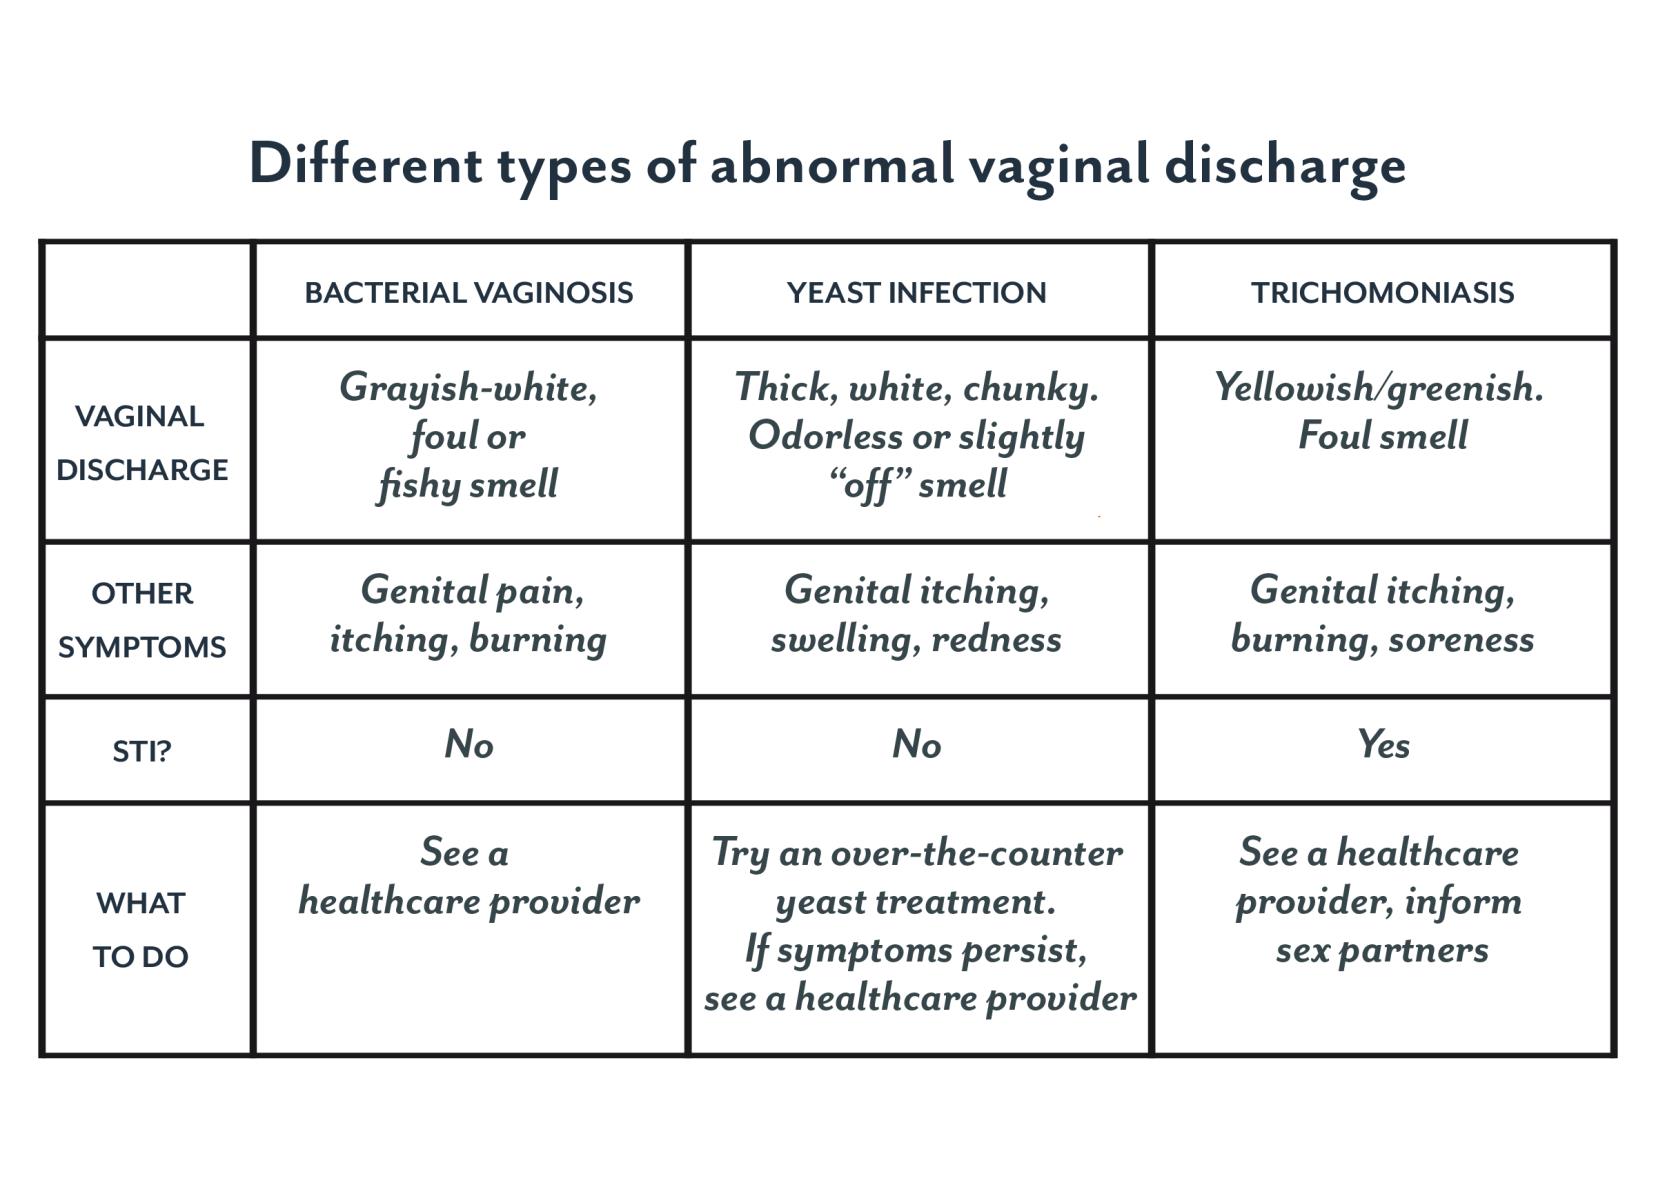 Table showing different types of vaginal infections, related discharge and other symptoms, and what to do. 